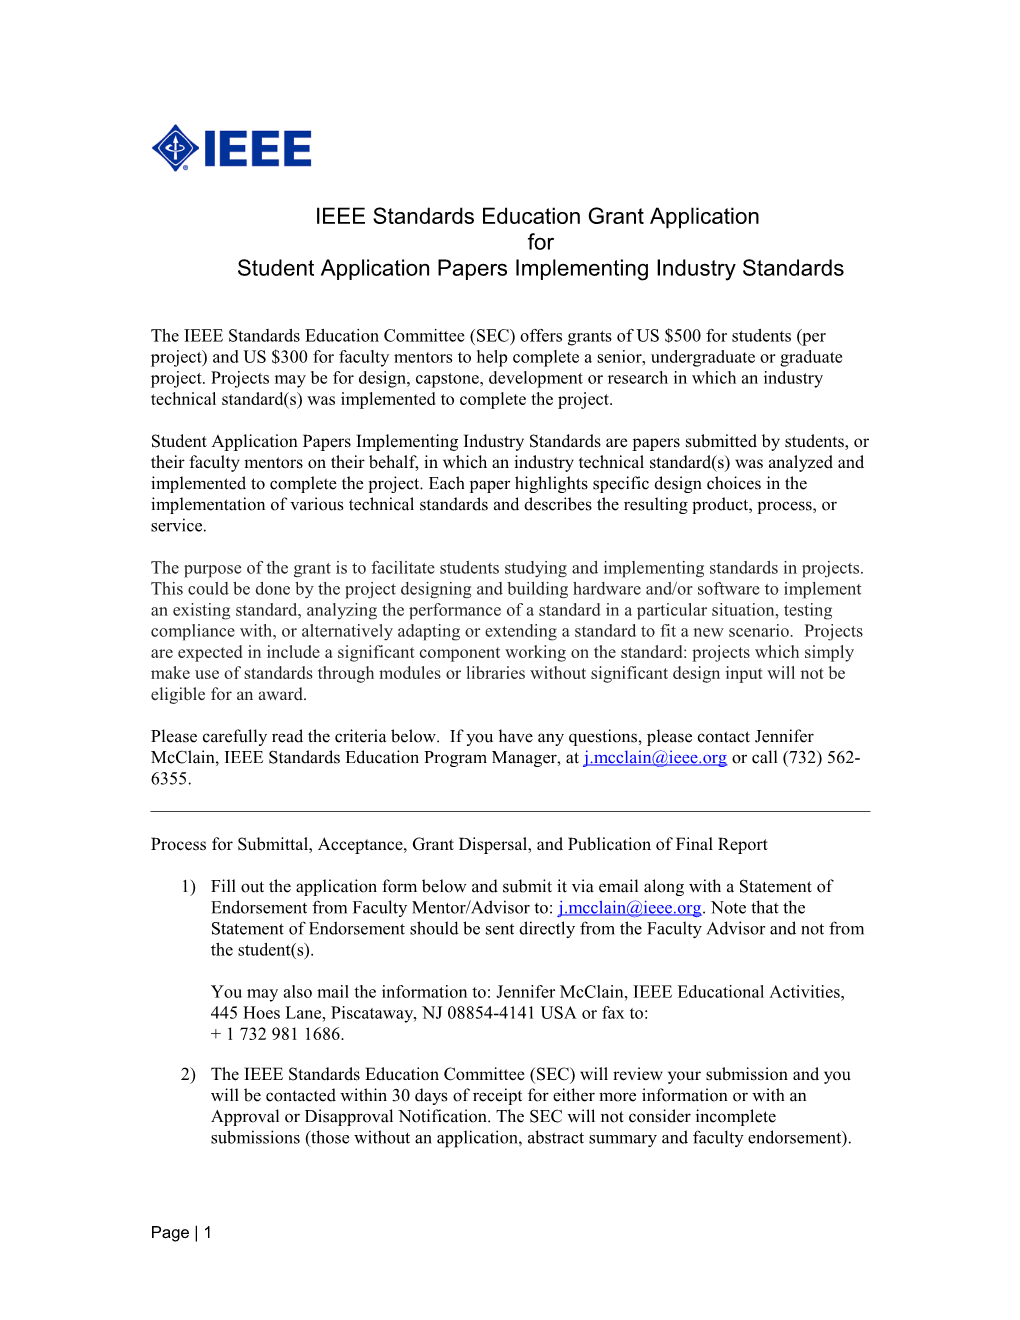 IEEE Standards Education Grant Application for Student Application Papers Implementing